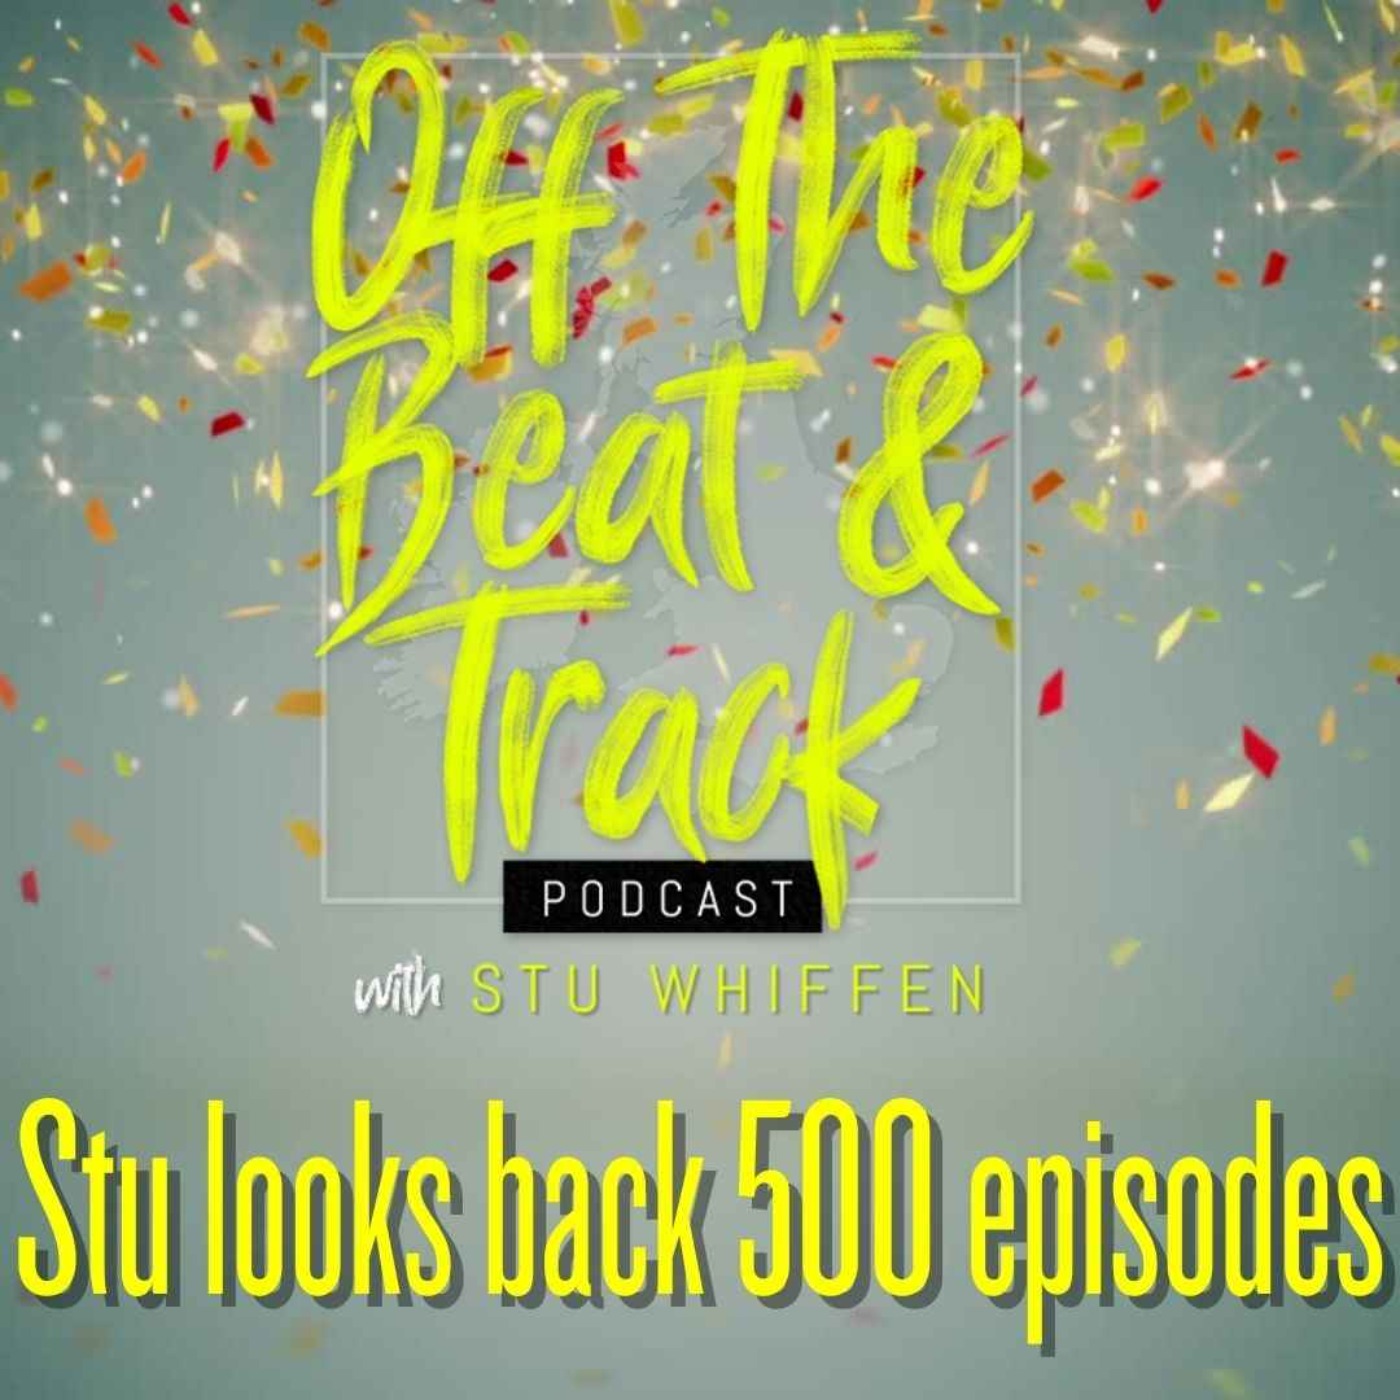 Stu chats 500 episodes and more